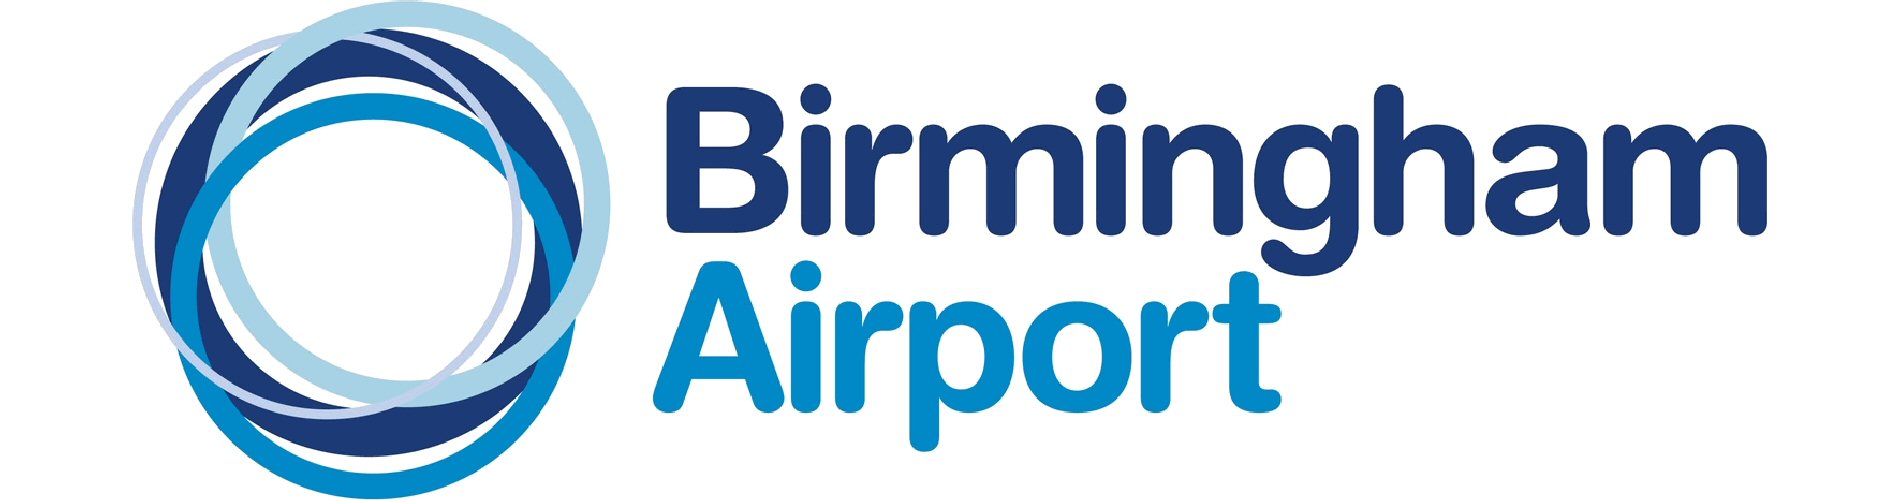 Birmingham Airport. We provide a chauffeur driven executive car services utilising high end vehicles for a wide range of purposes